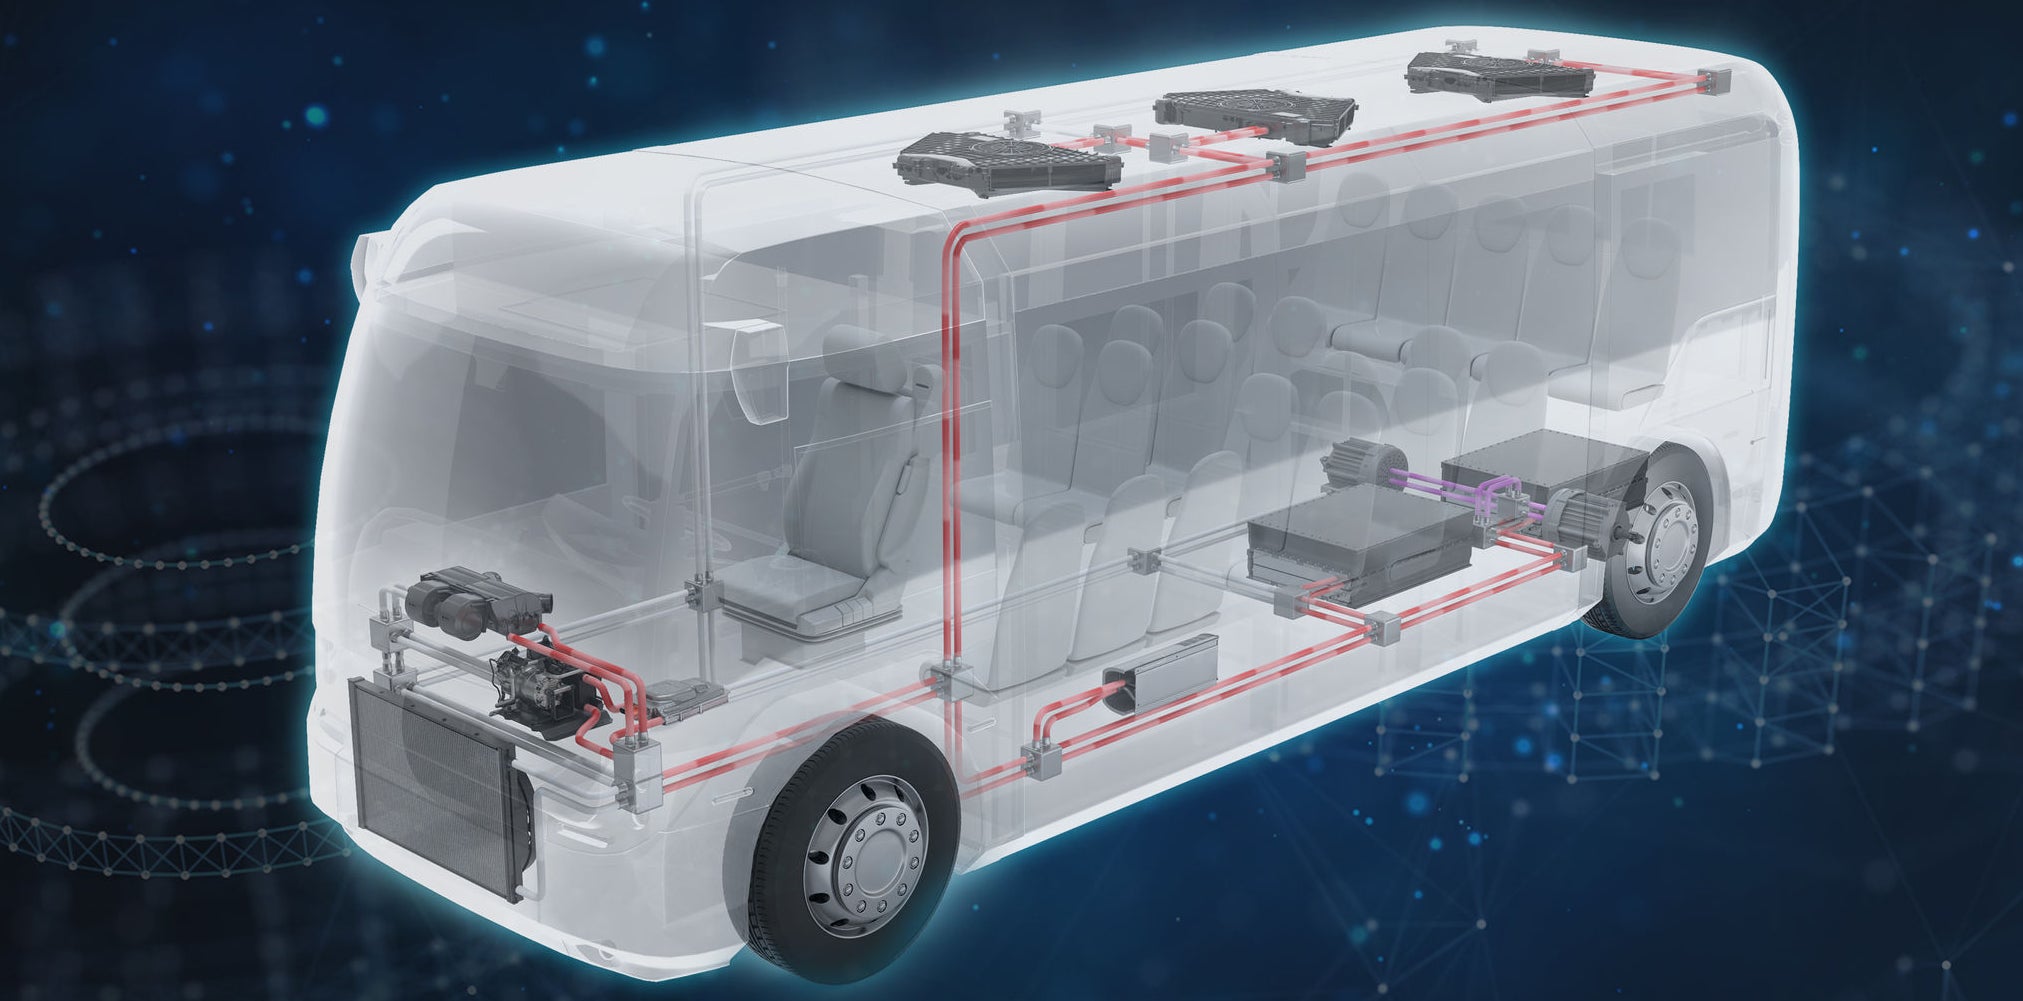 The eTM is Webasto's electrical thermal management system that keeps both the traction batteries and the driver and passenger cab at optimum temperatures.